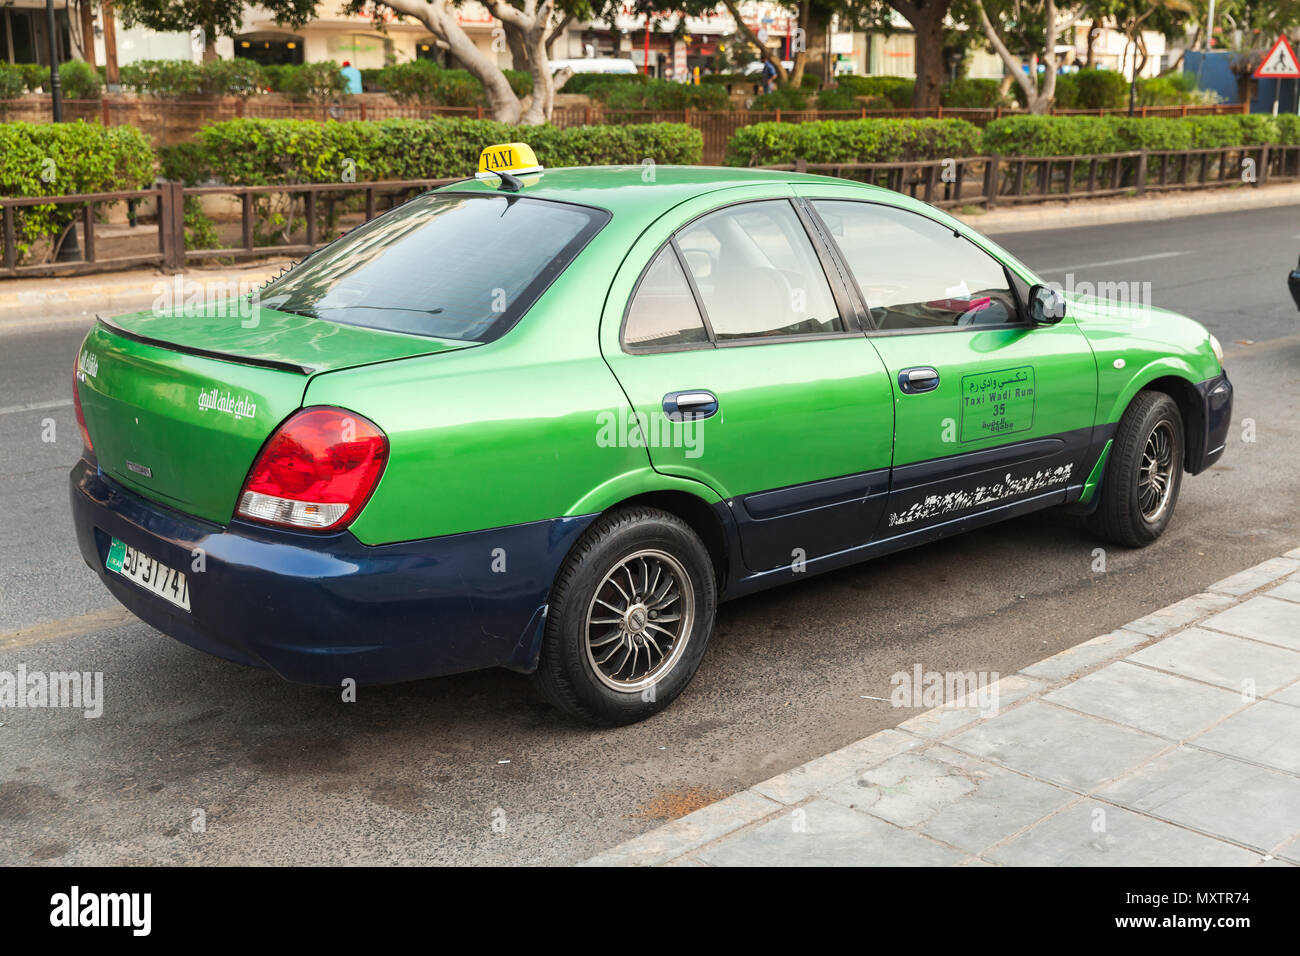 Aqaba, Jordan - May 18, 2018: Green taxi car stands parked on a street side in Aqaba city, rear view Stock Photo